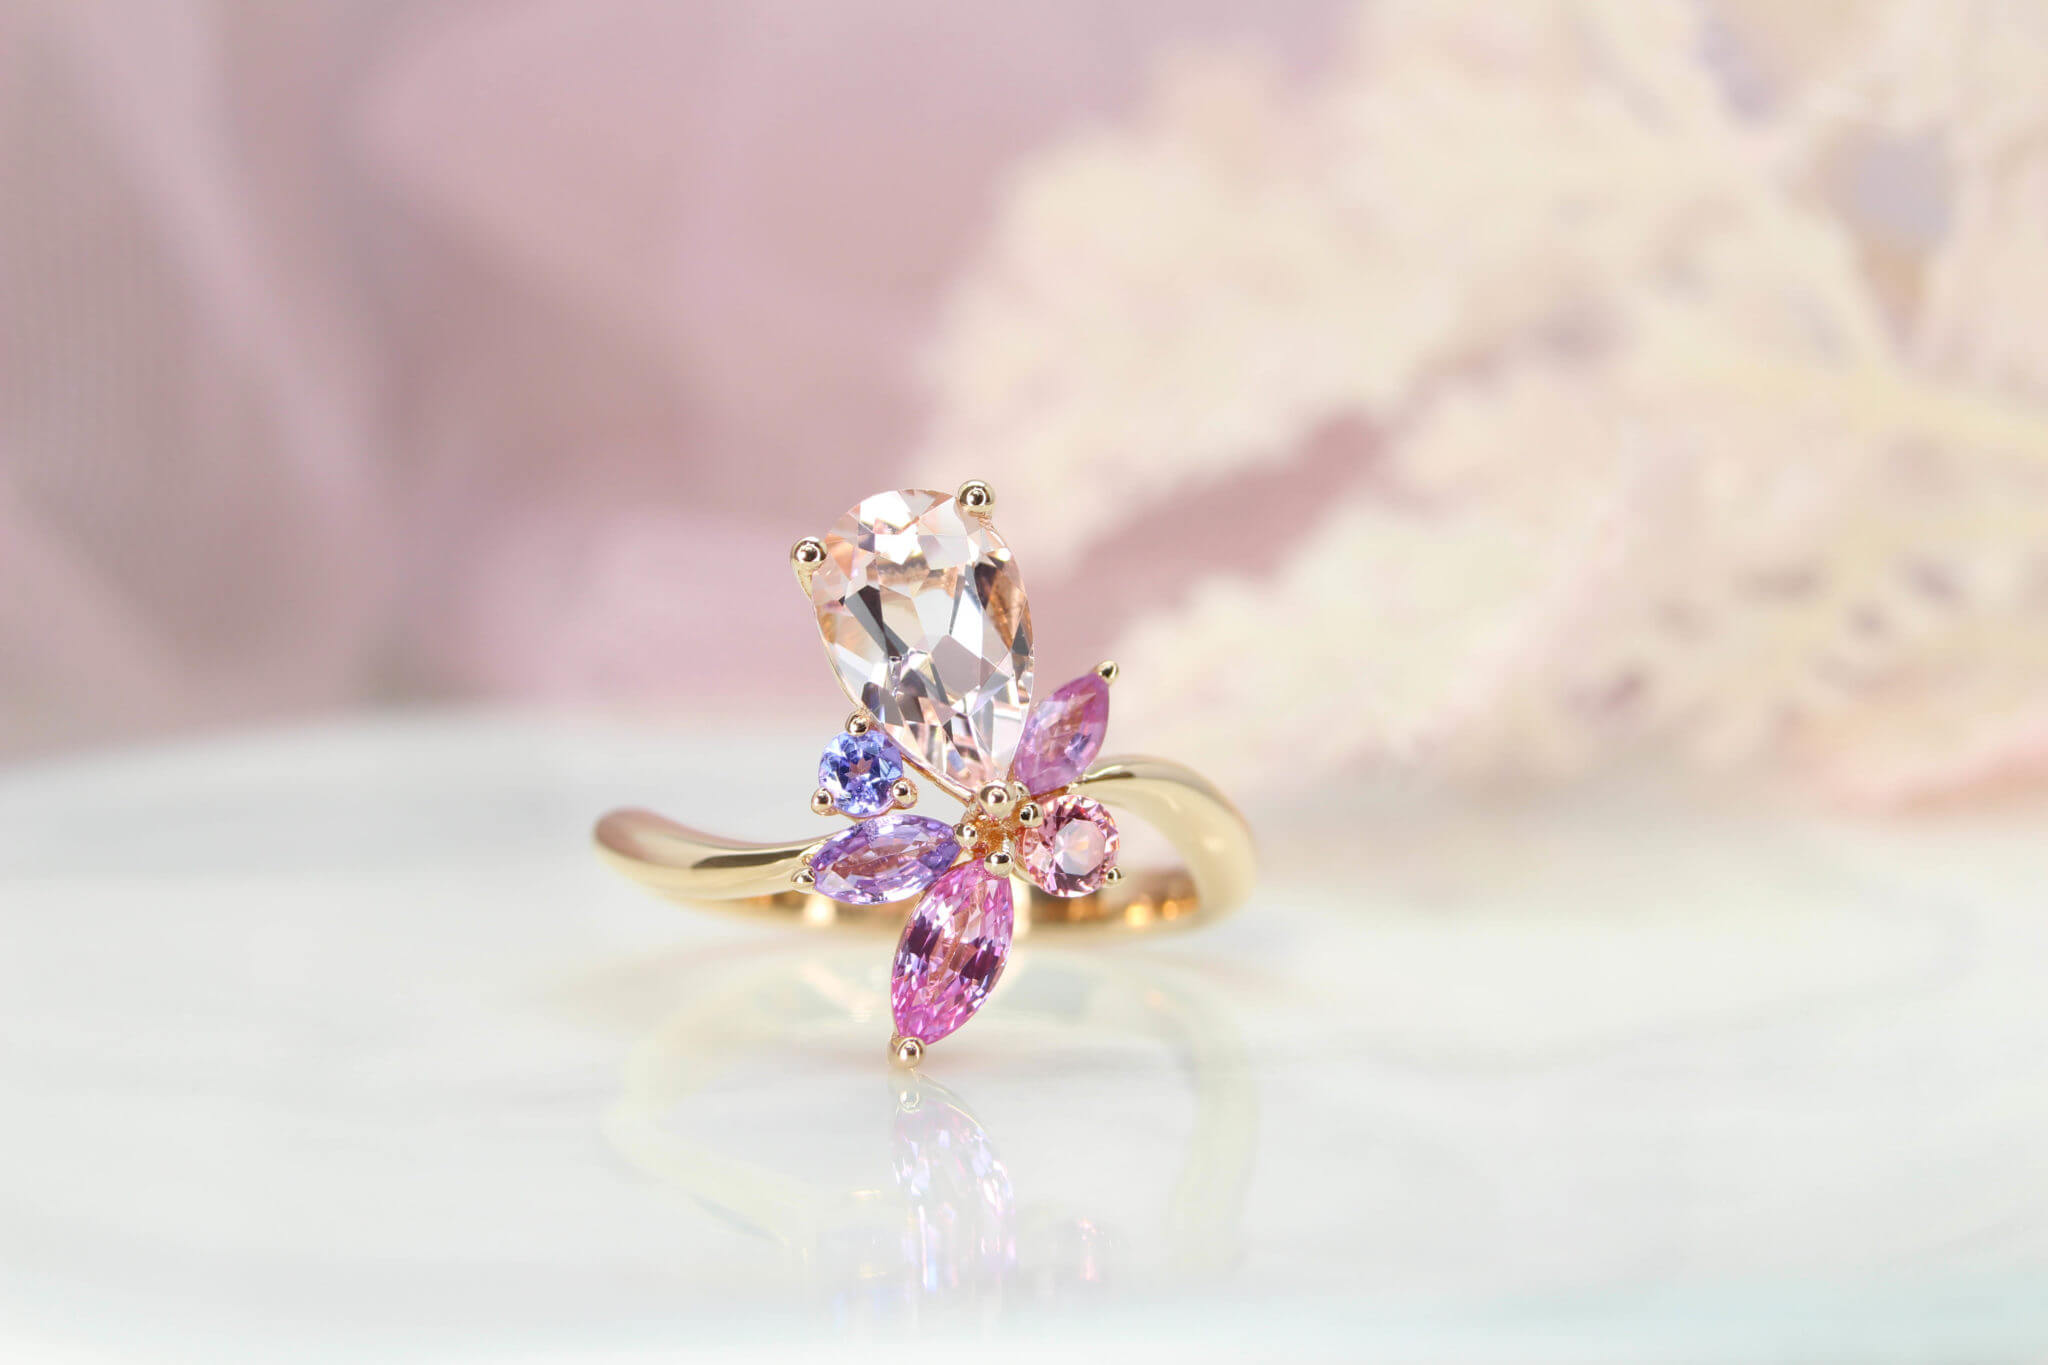 Floral Engagement Ring, customised with Morganite pear with orange and pink coloured shade, violet and pink sapphire in marquise shapes. Designed and crafted to a unique floral engagement ring | Local Singapore Jeweller customised engagement ring in floral design.